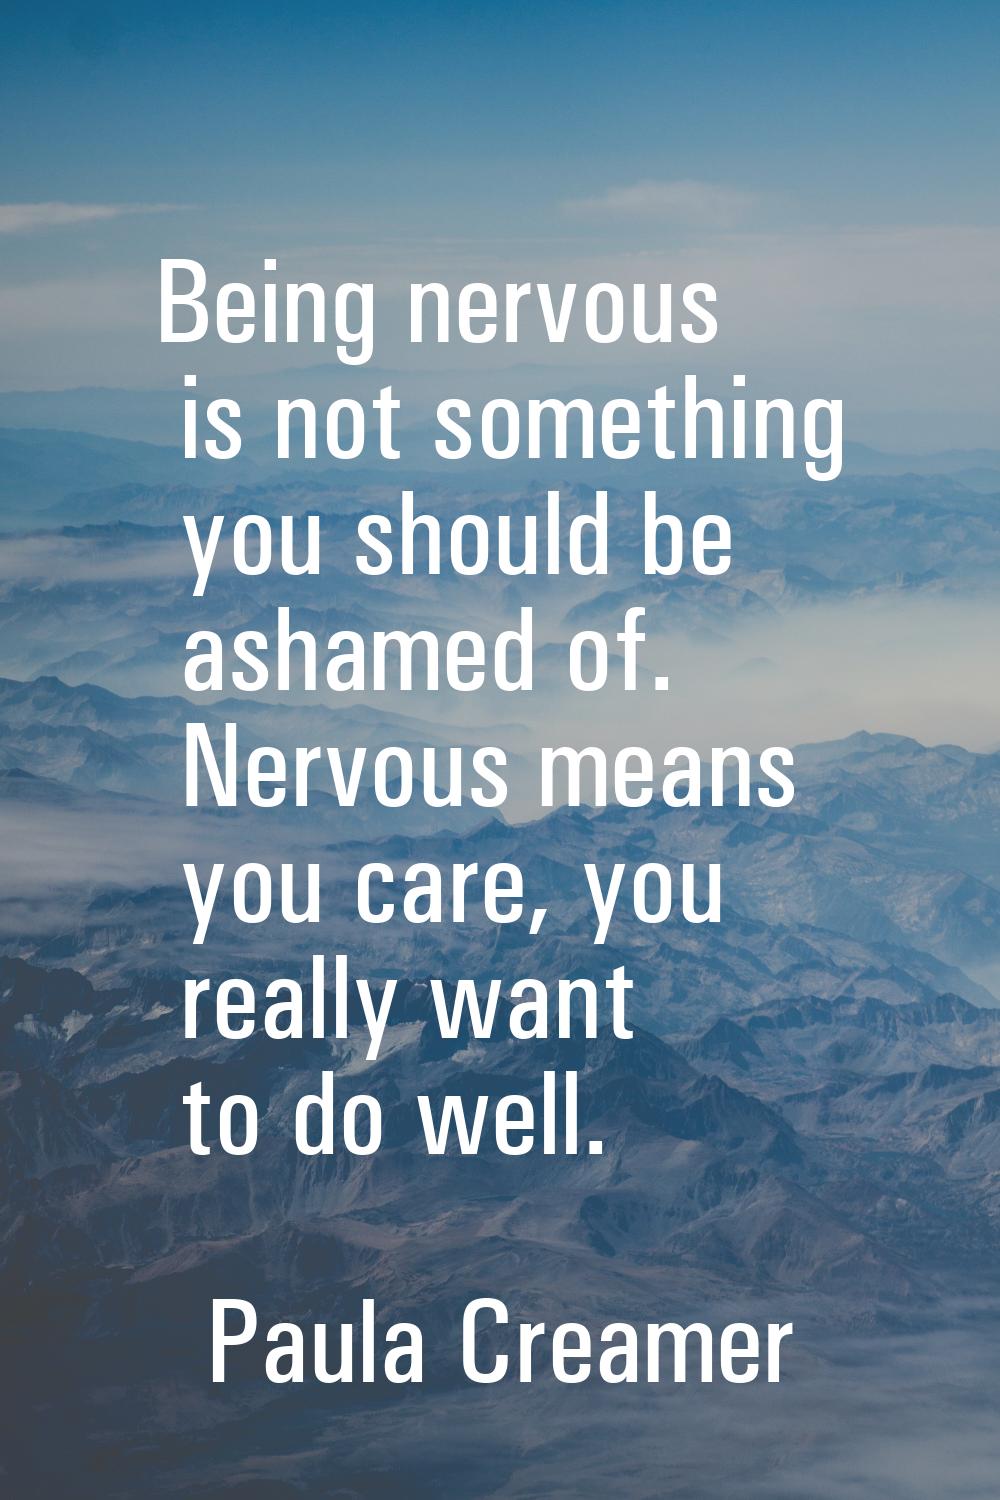 Being nervous is not something you should be ashamed of. Nervous means you care, you really want to